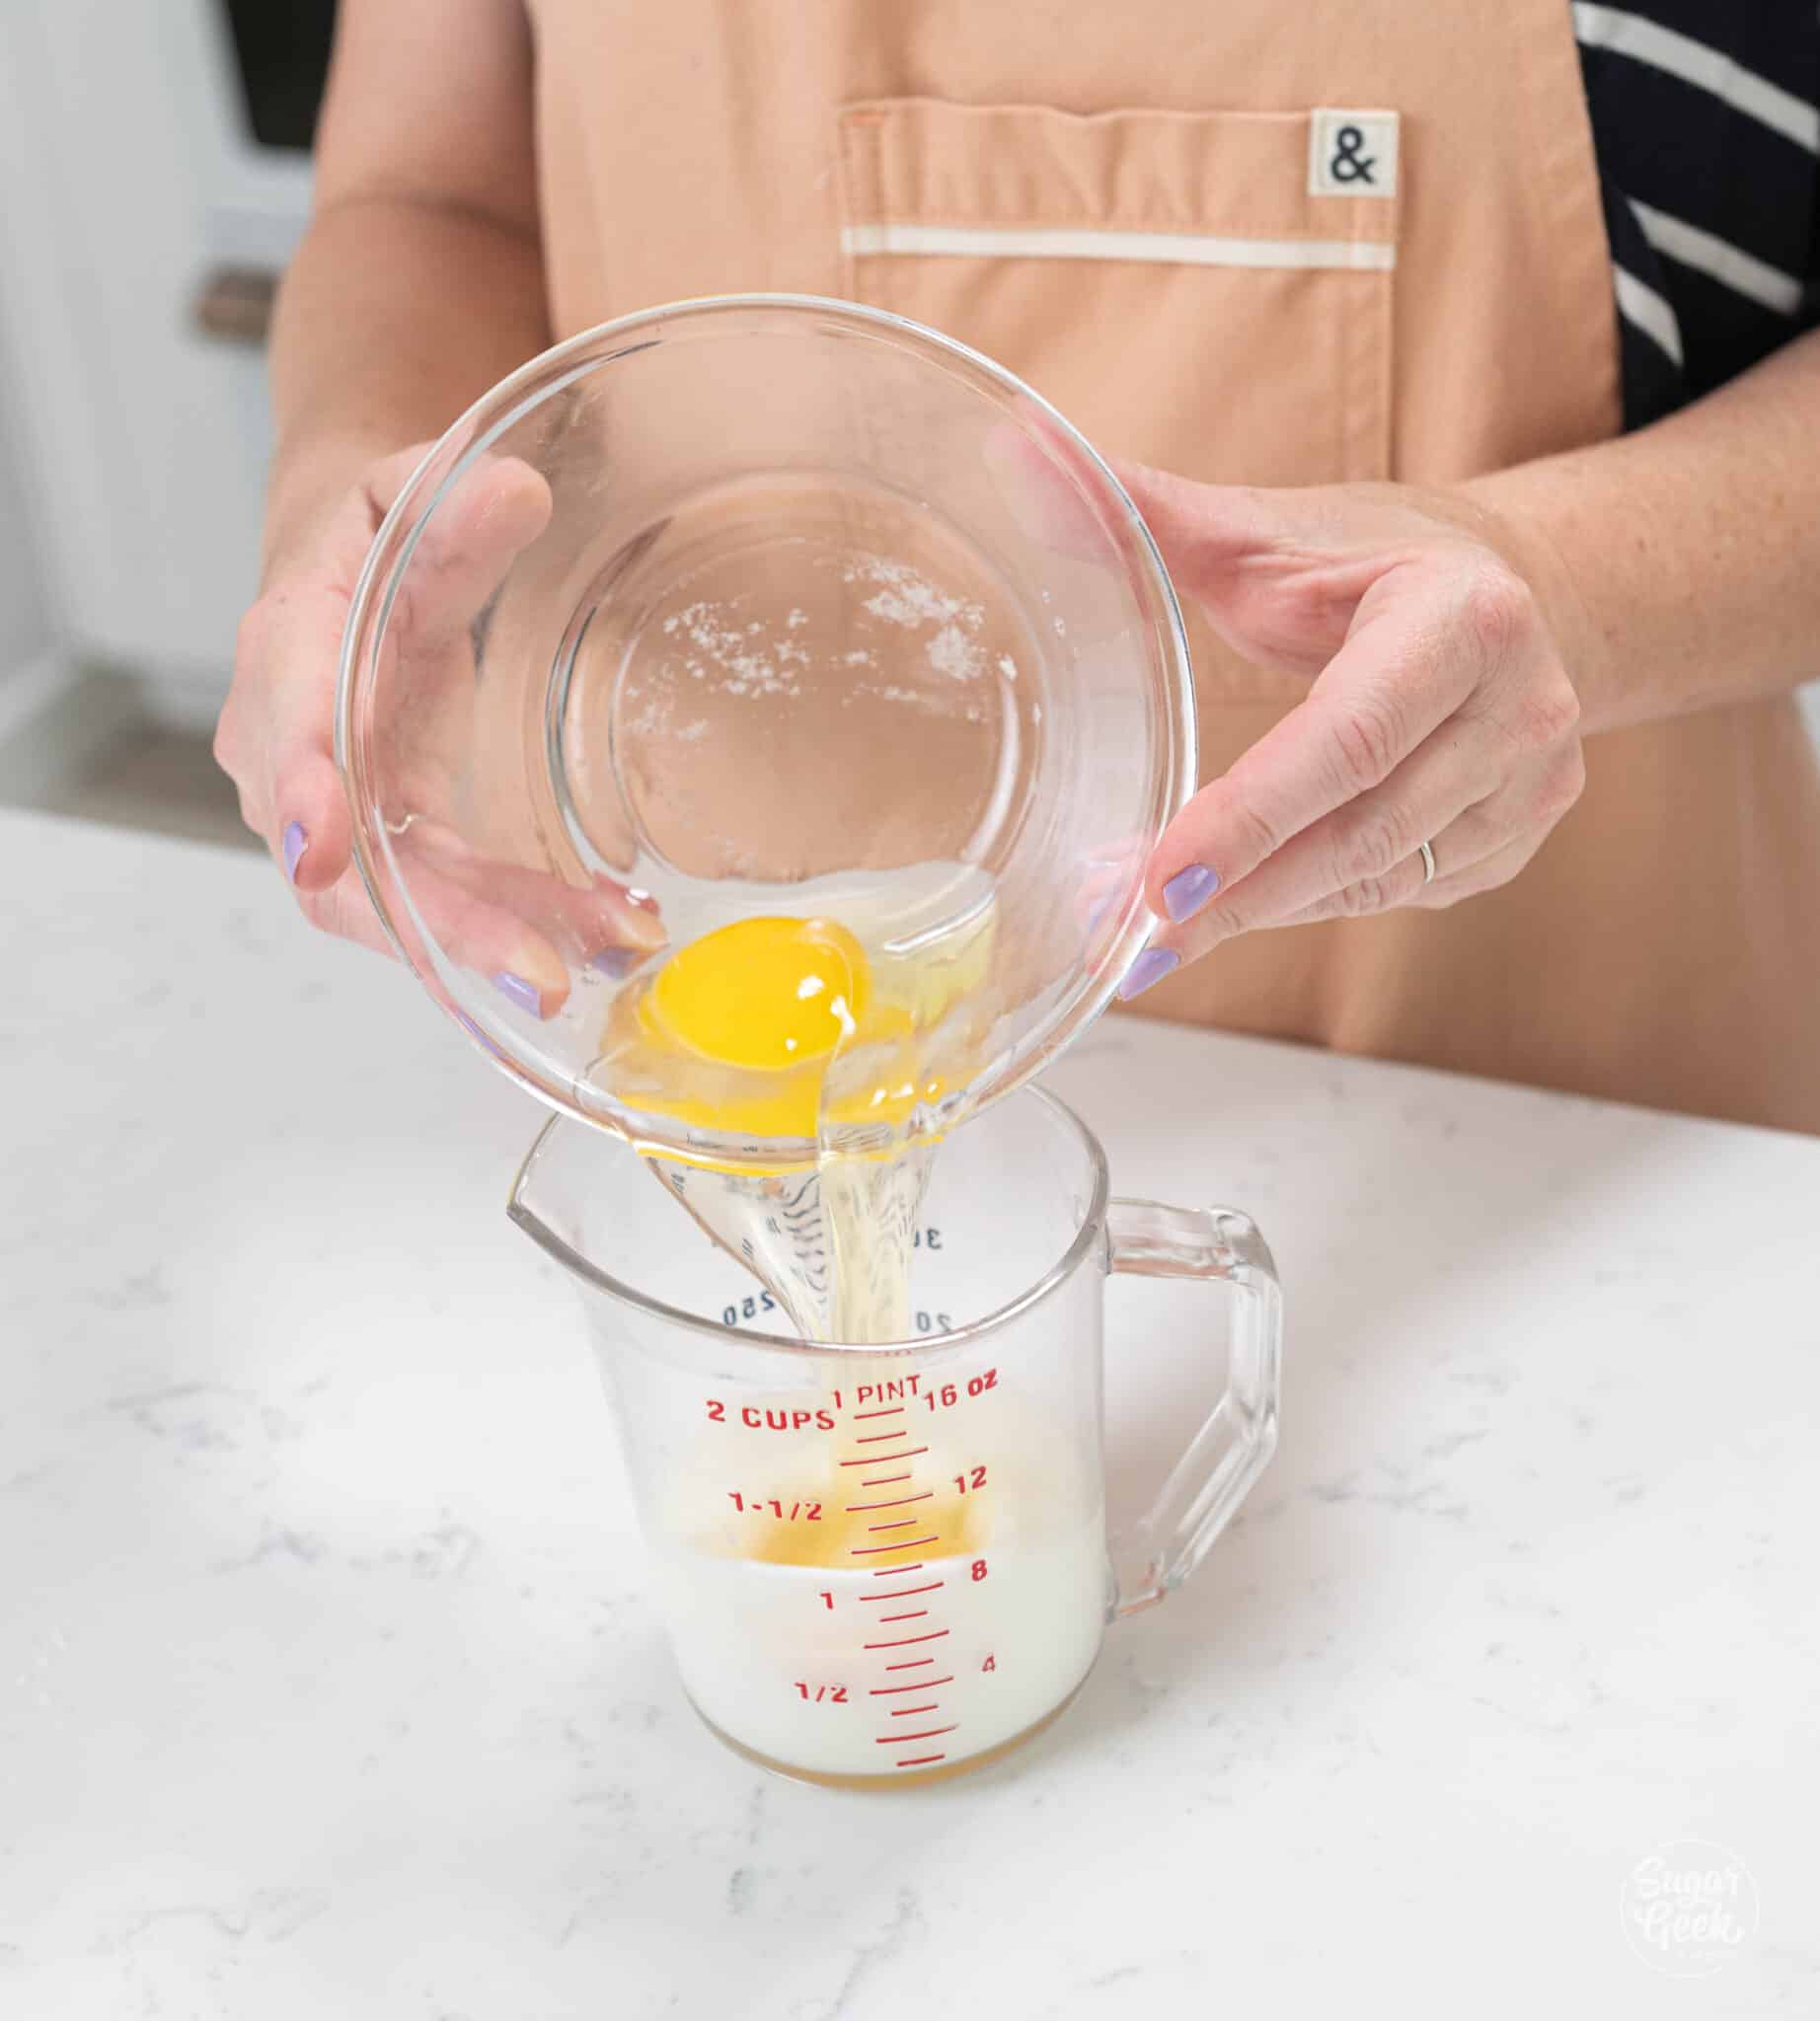 hands pouring bowl of eggs into measuring cup.